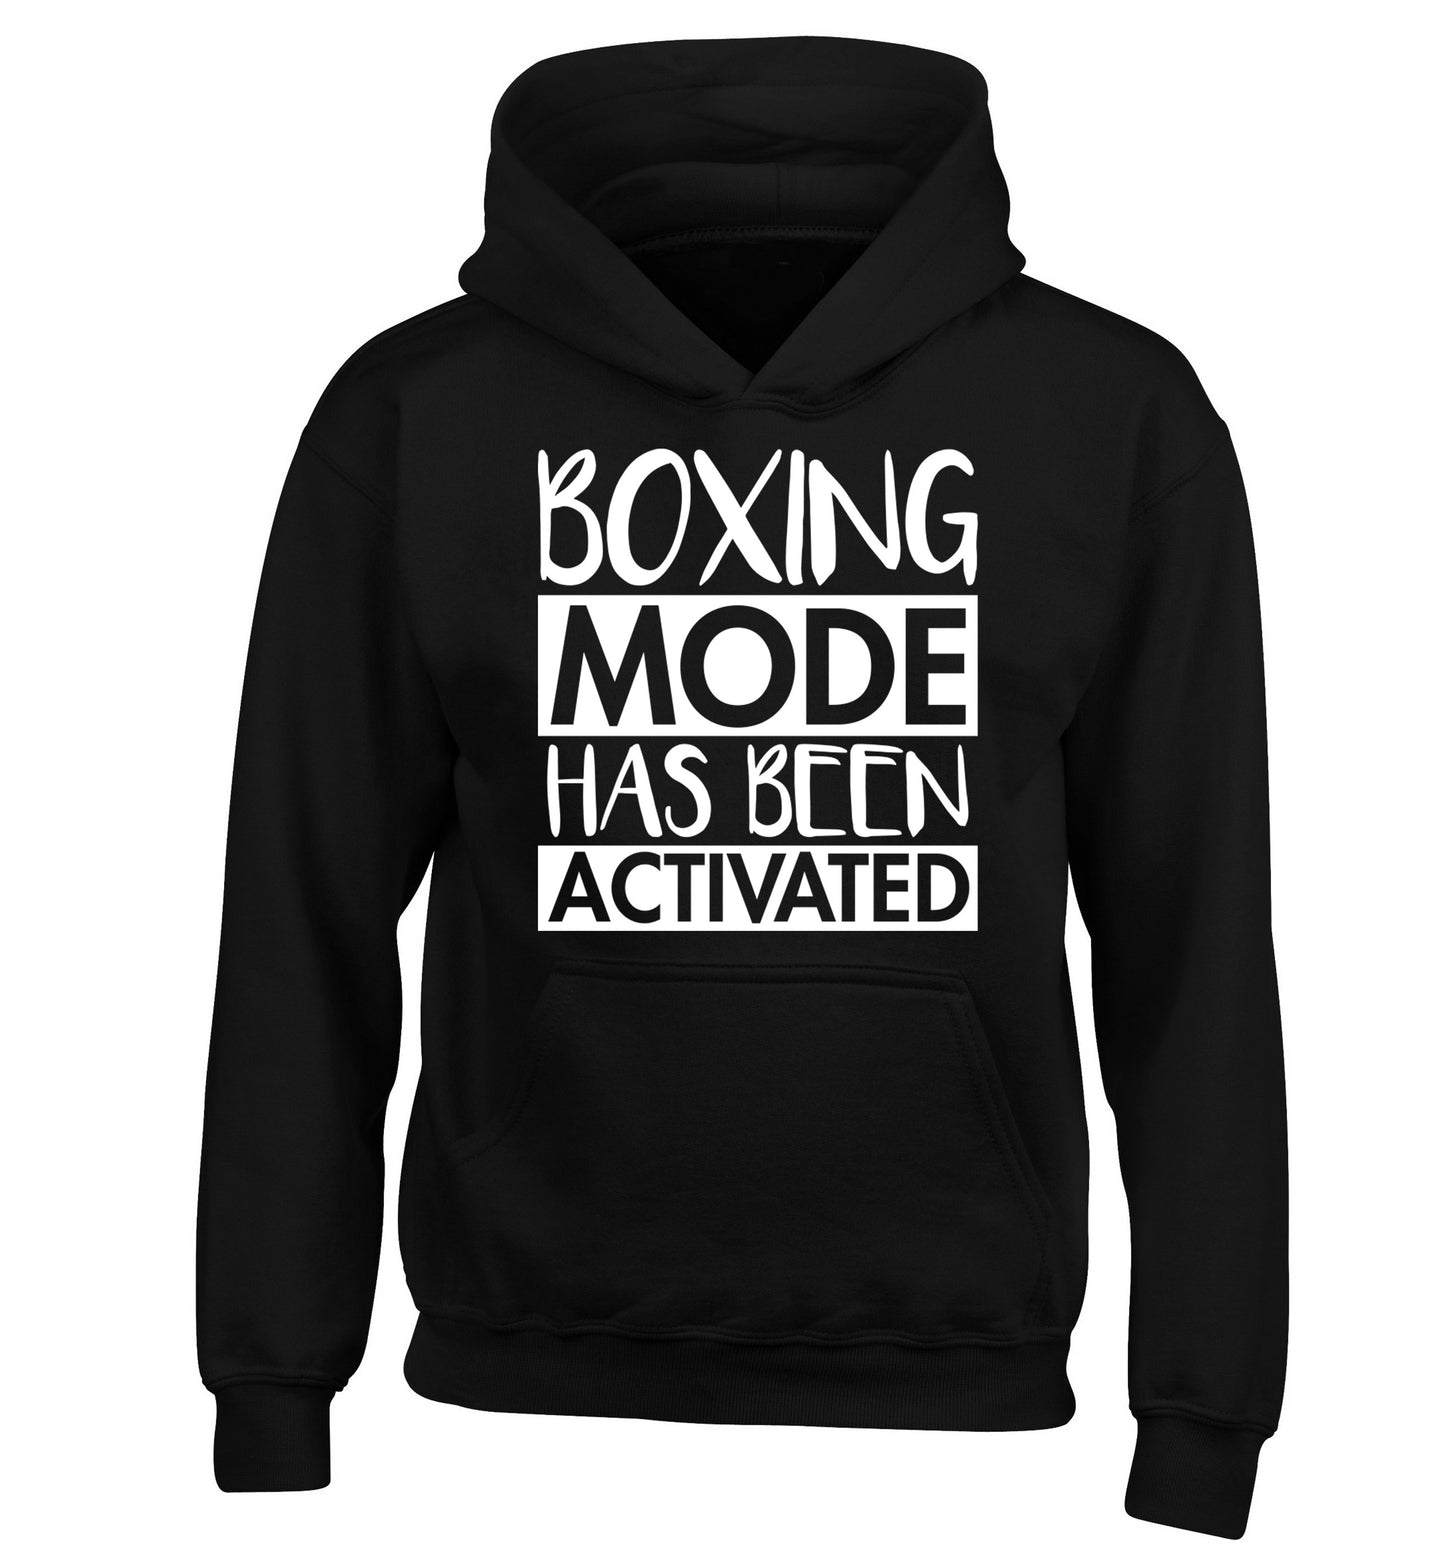 Boxing mode activated children's black hoodie 12-14 Years